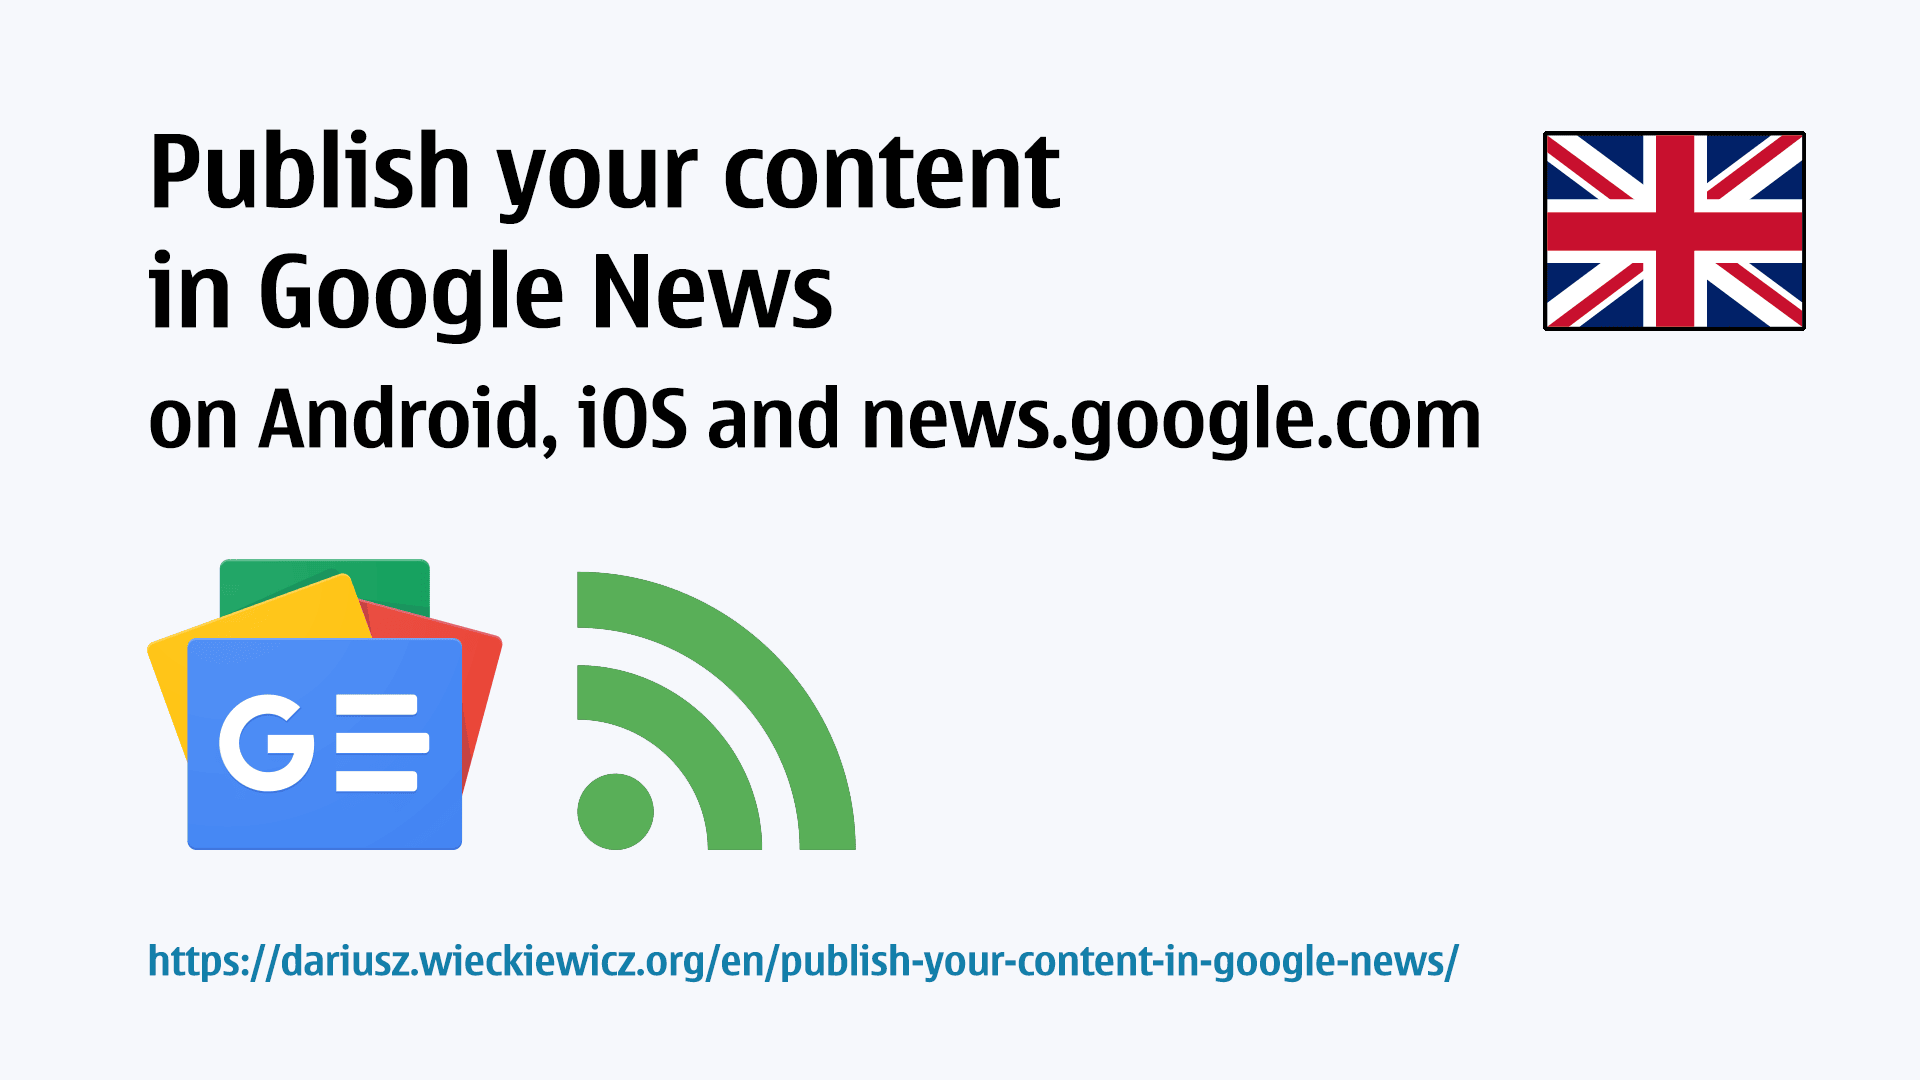 Publish your content in Google News on Android, iOS and news.google.com